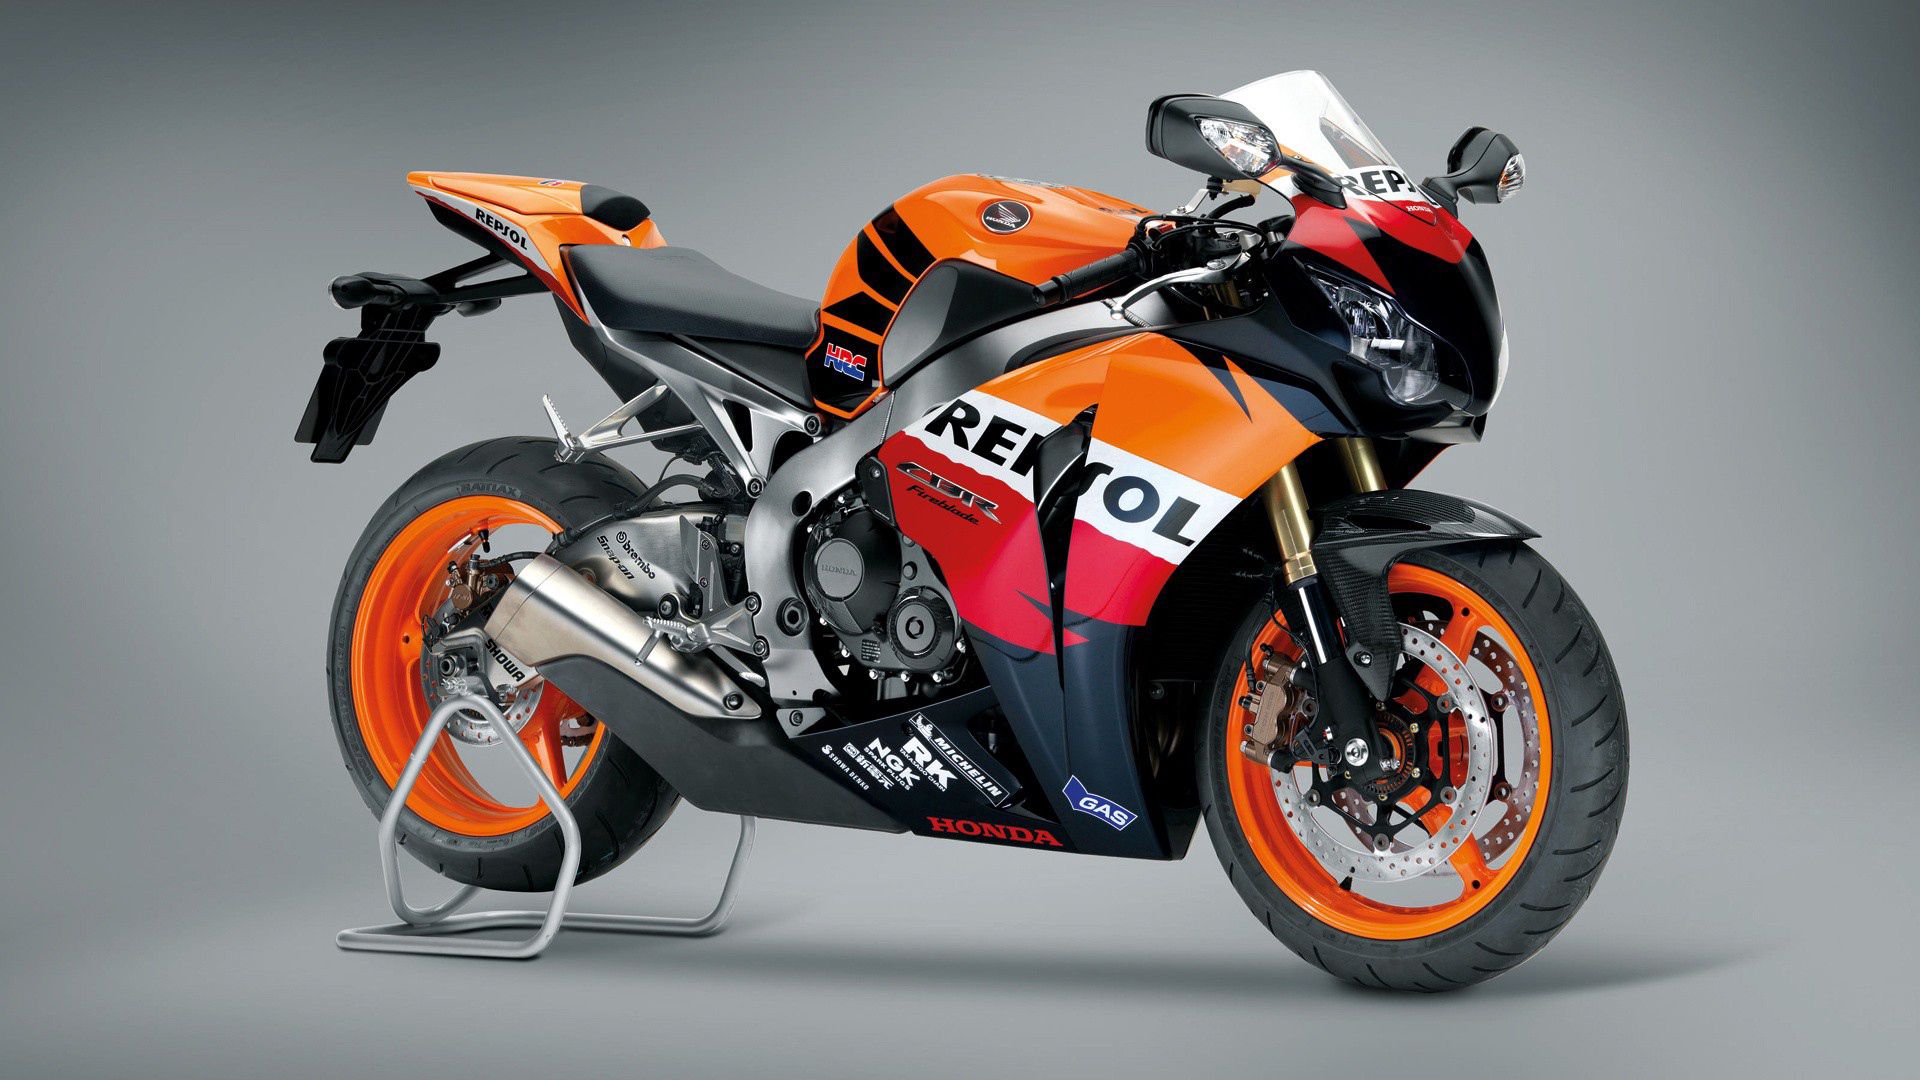 honda, motorcycles, side view, motorcycle, repsol High Definition image